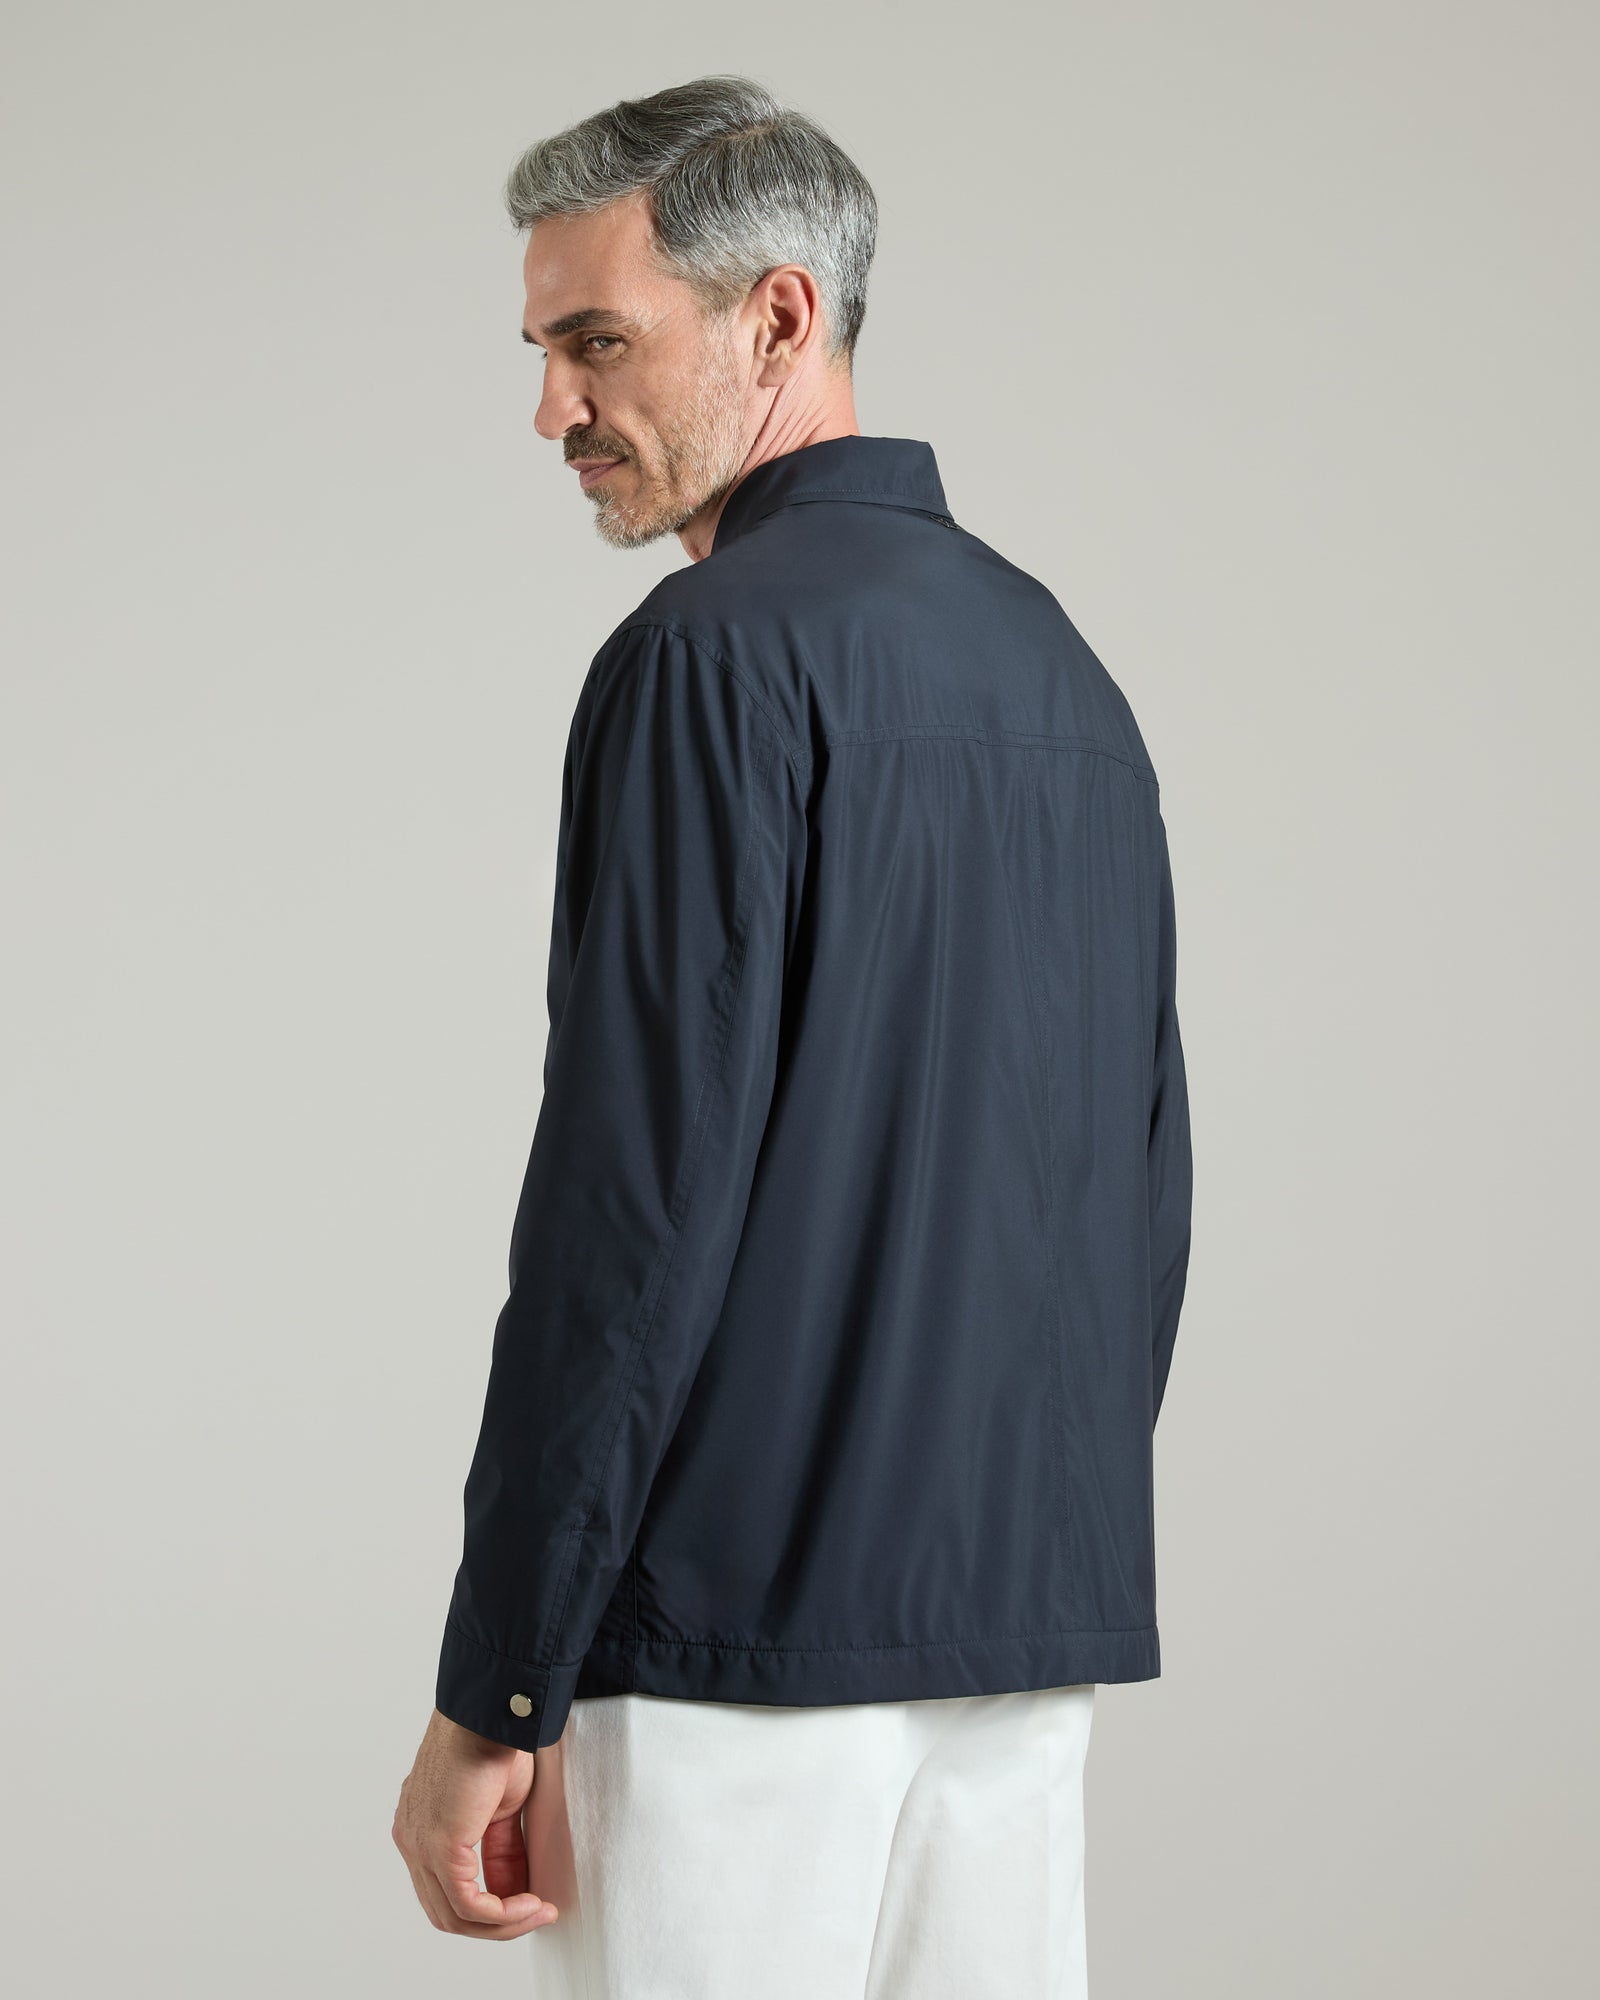 Outerwear 20 KNOTS in navy